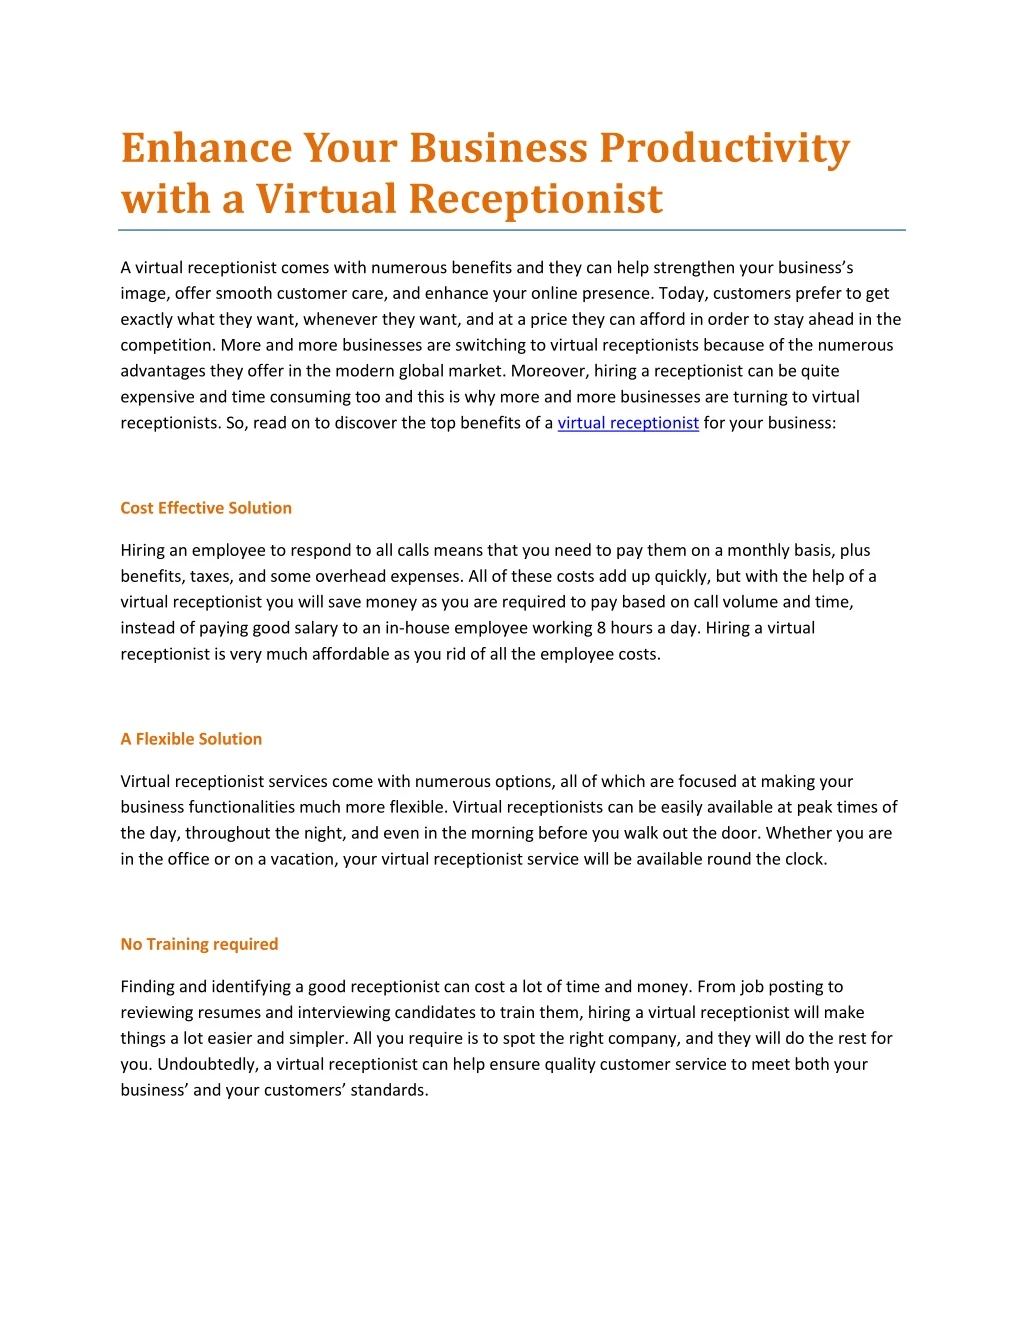 enhance your business productivity with a virtual